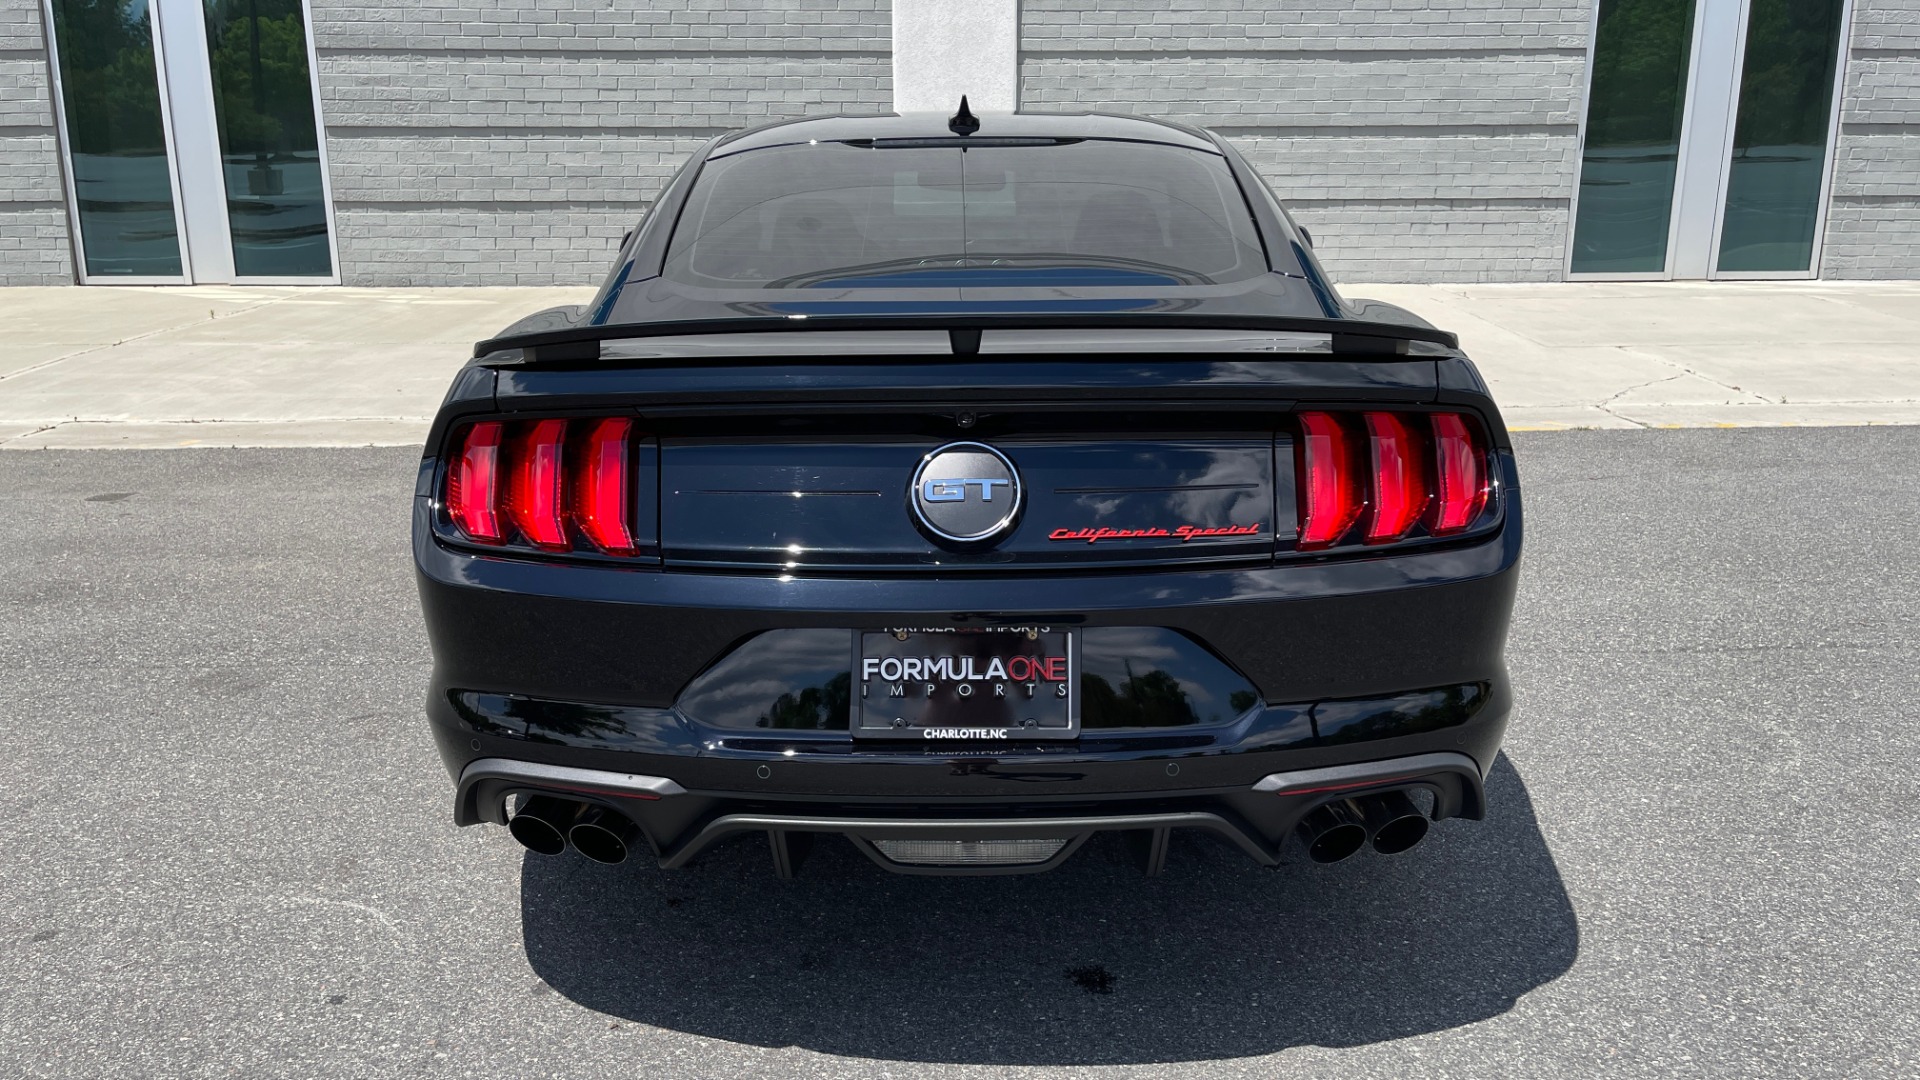 Used 2020 Ford MUSTANG GT PREMIUM / CALIFORNIA SPECIAL / 5.0L V8 / 6-SPD MAN for sale Sold at Formula Imports in Charlotte NC 28227 27